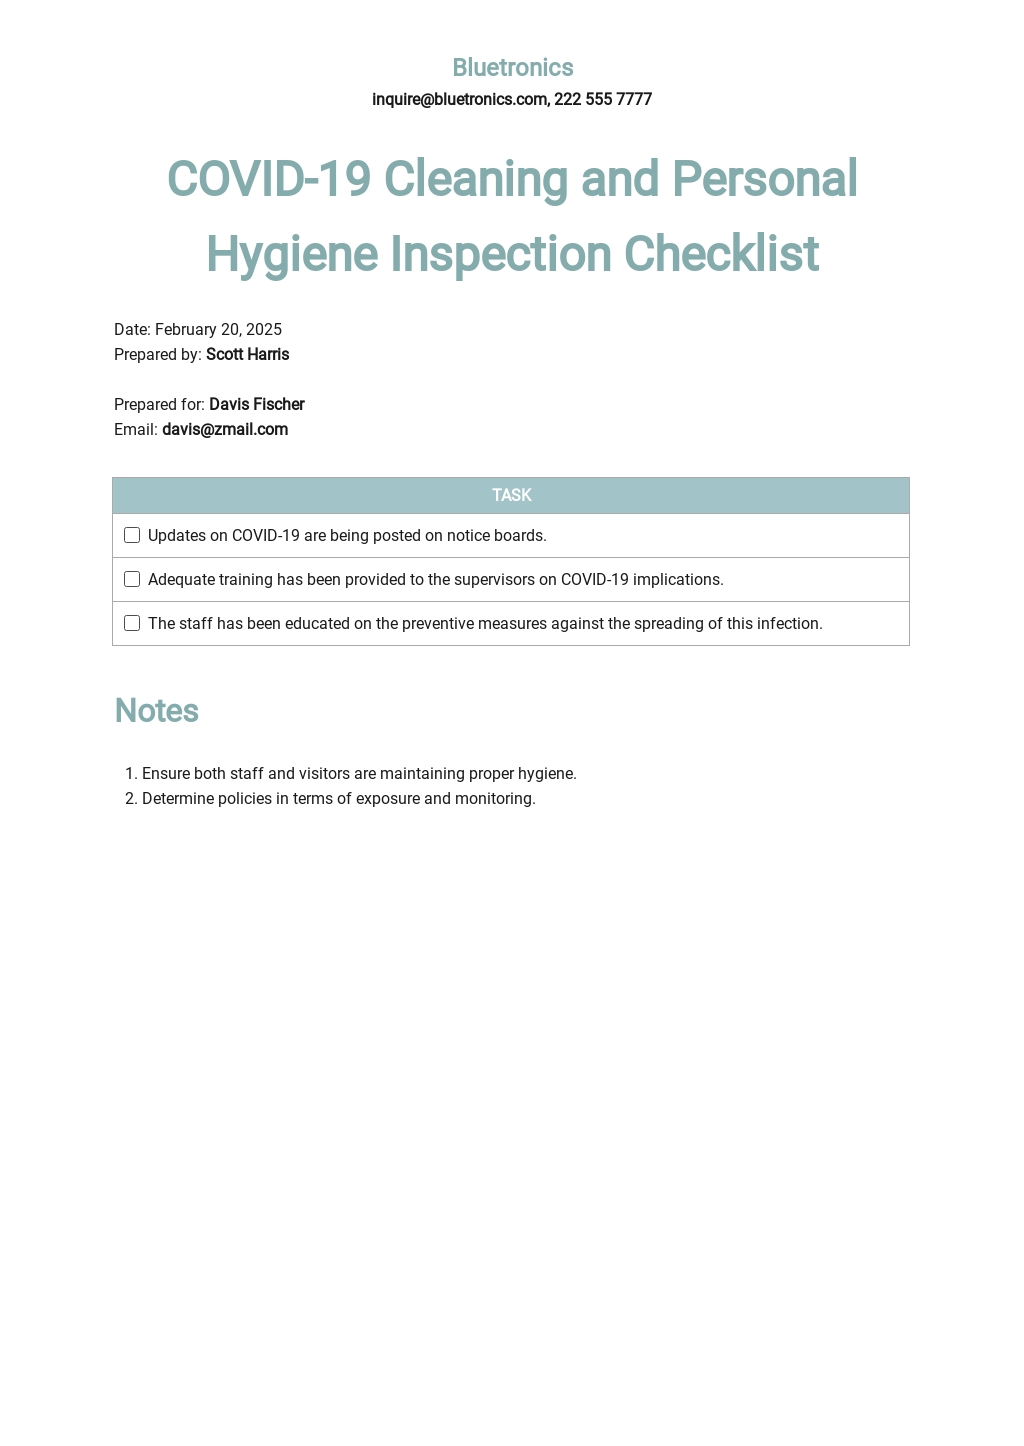 Coronavirus COVID 19 Cleaning and Personal Hygiene Inspection Checklist Template.jpe